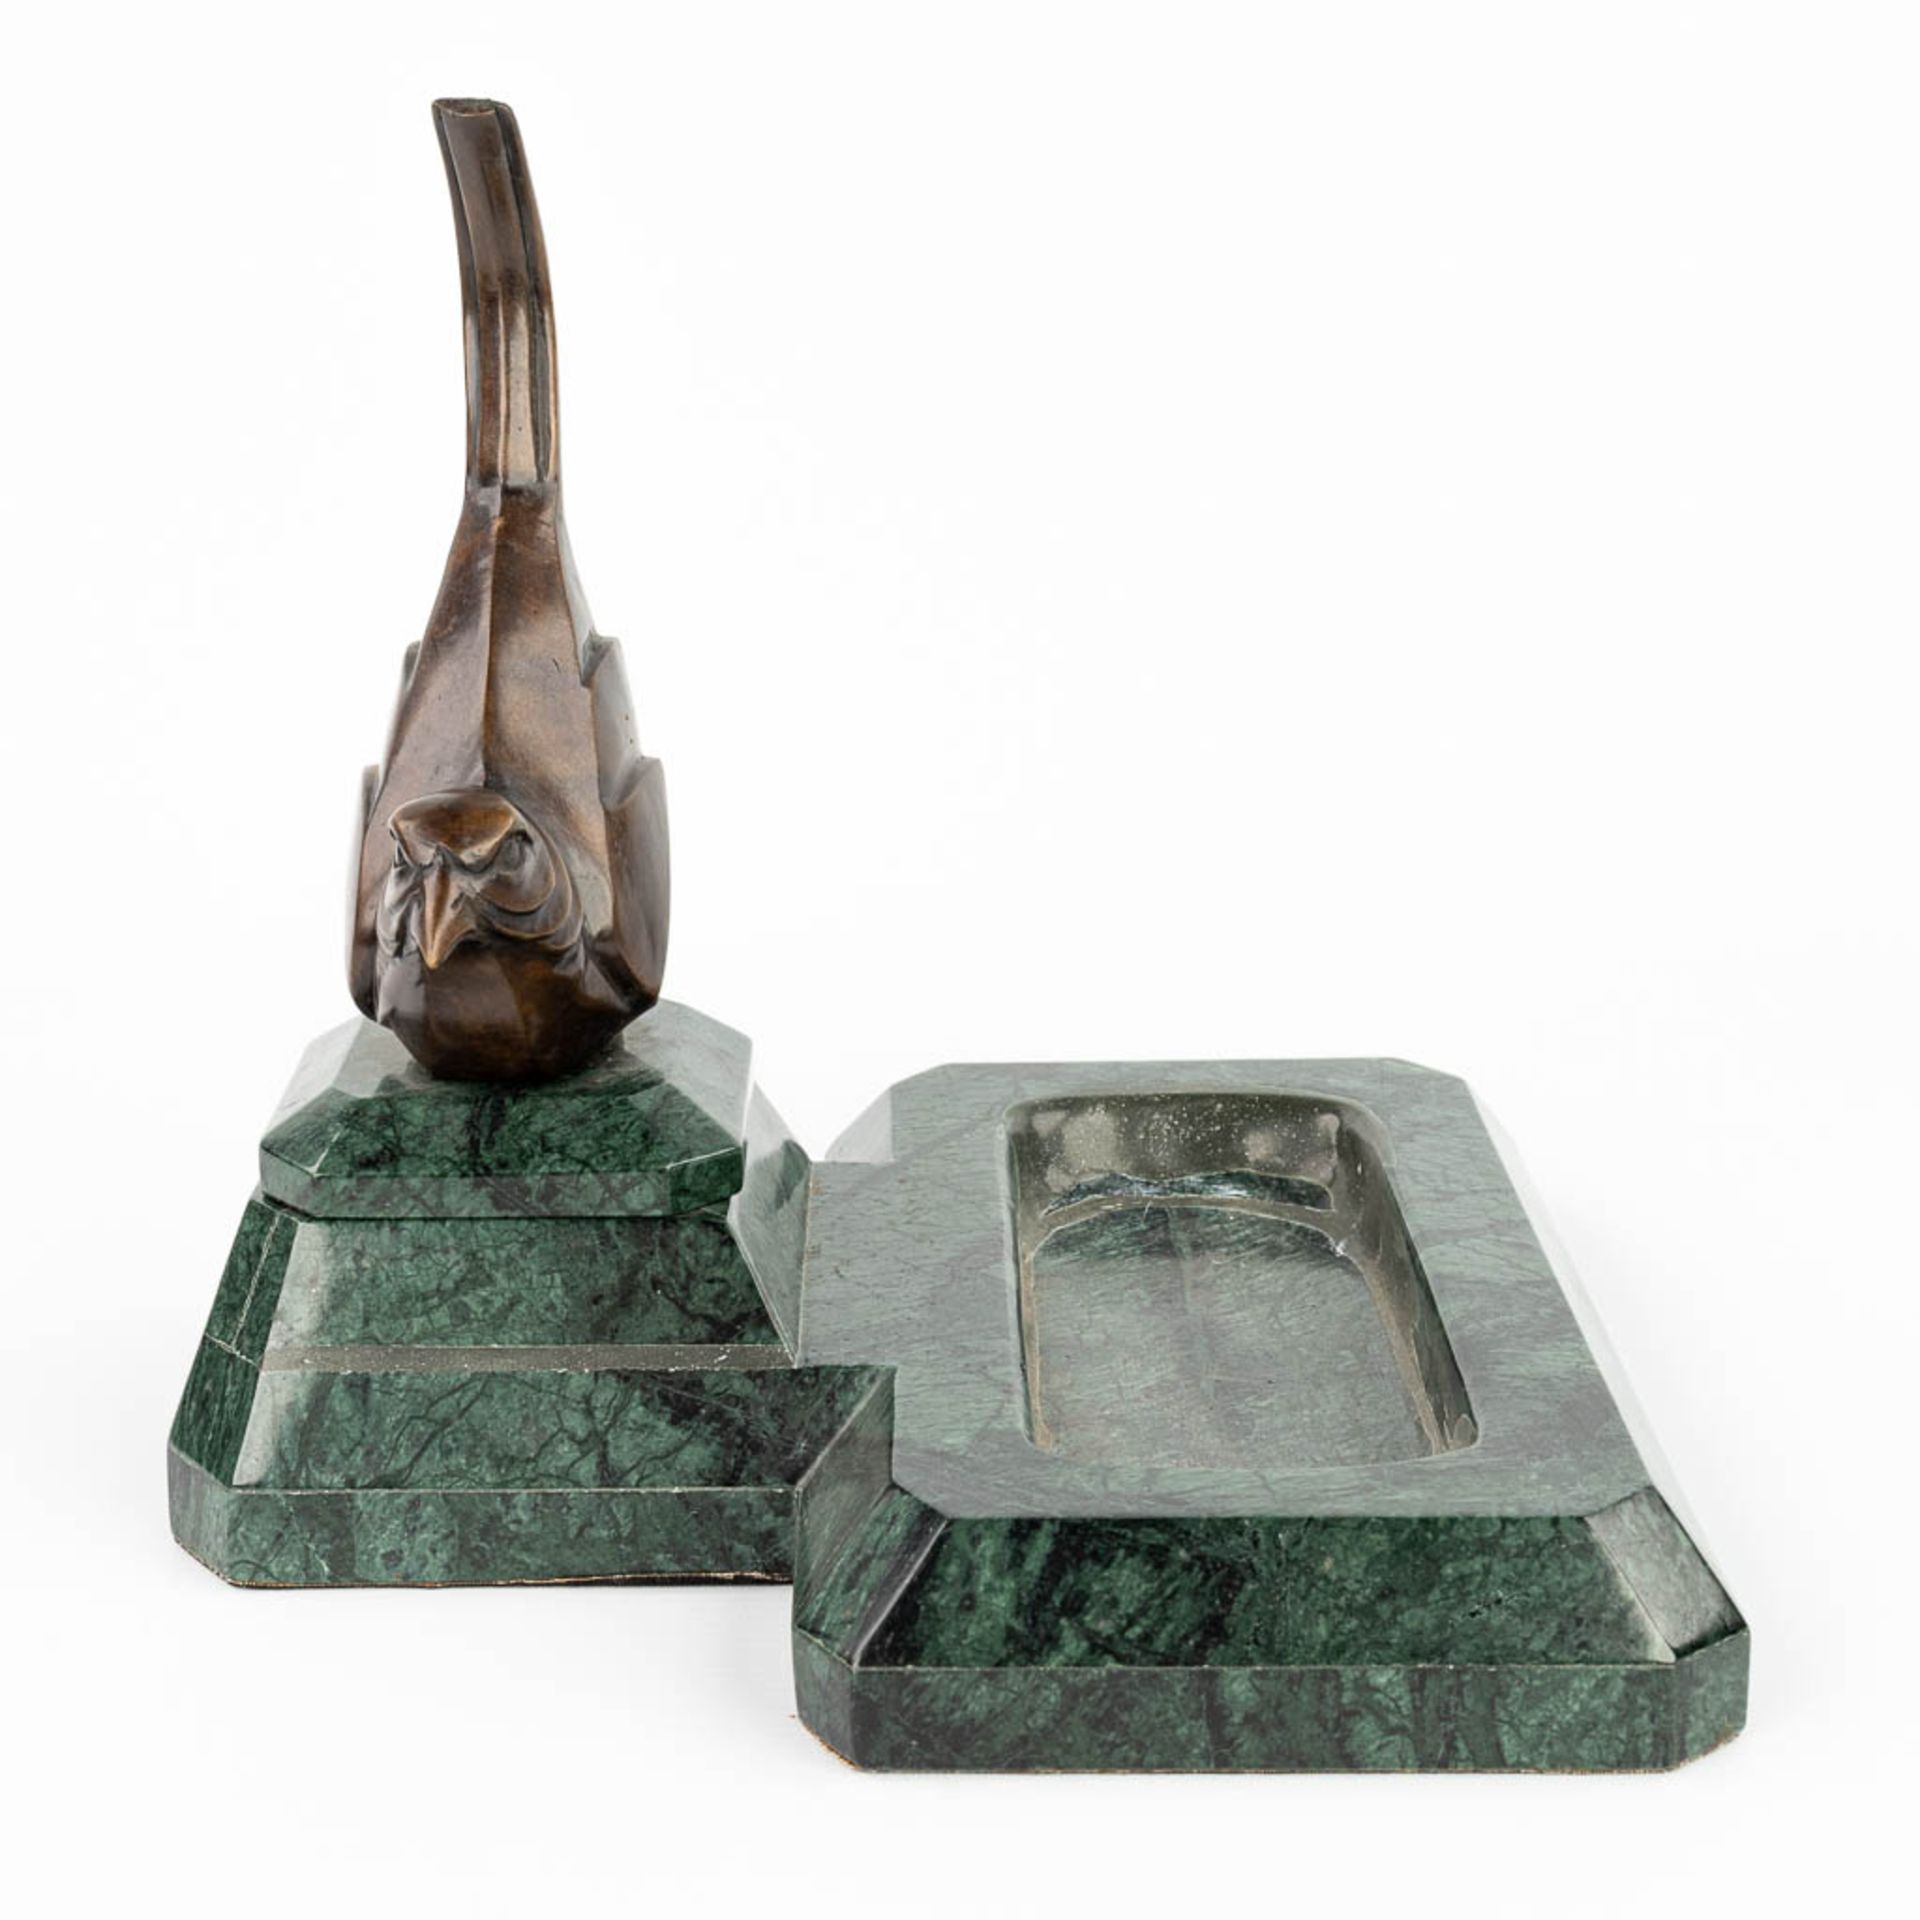 A 'Vide Poche' made of marble with a bird made of bronze in art deco style. - Image 5 of 10